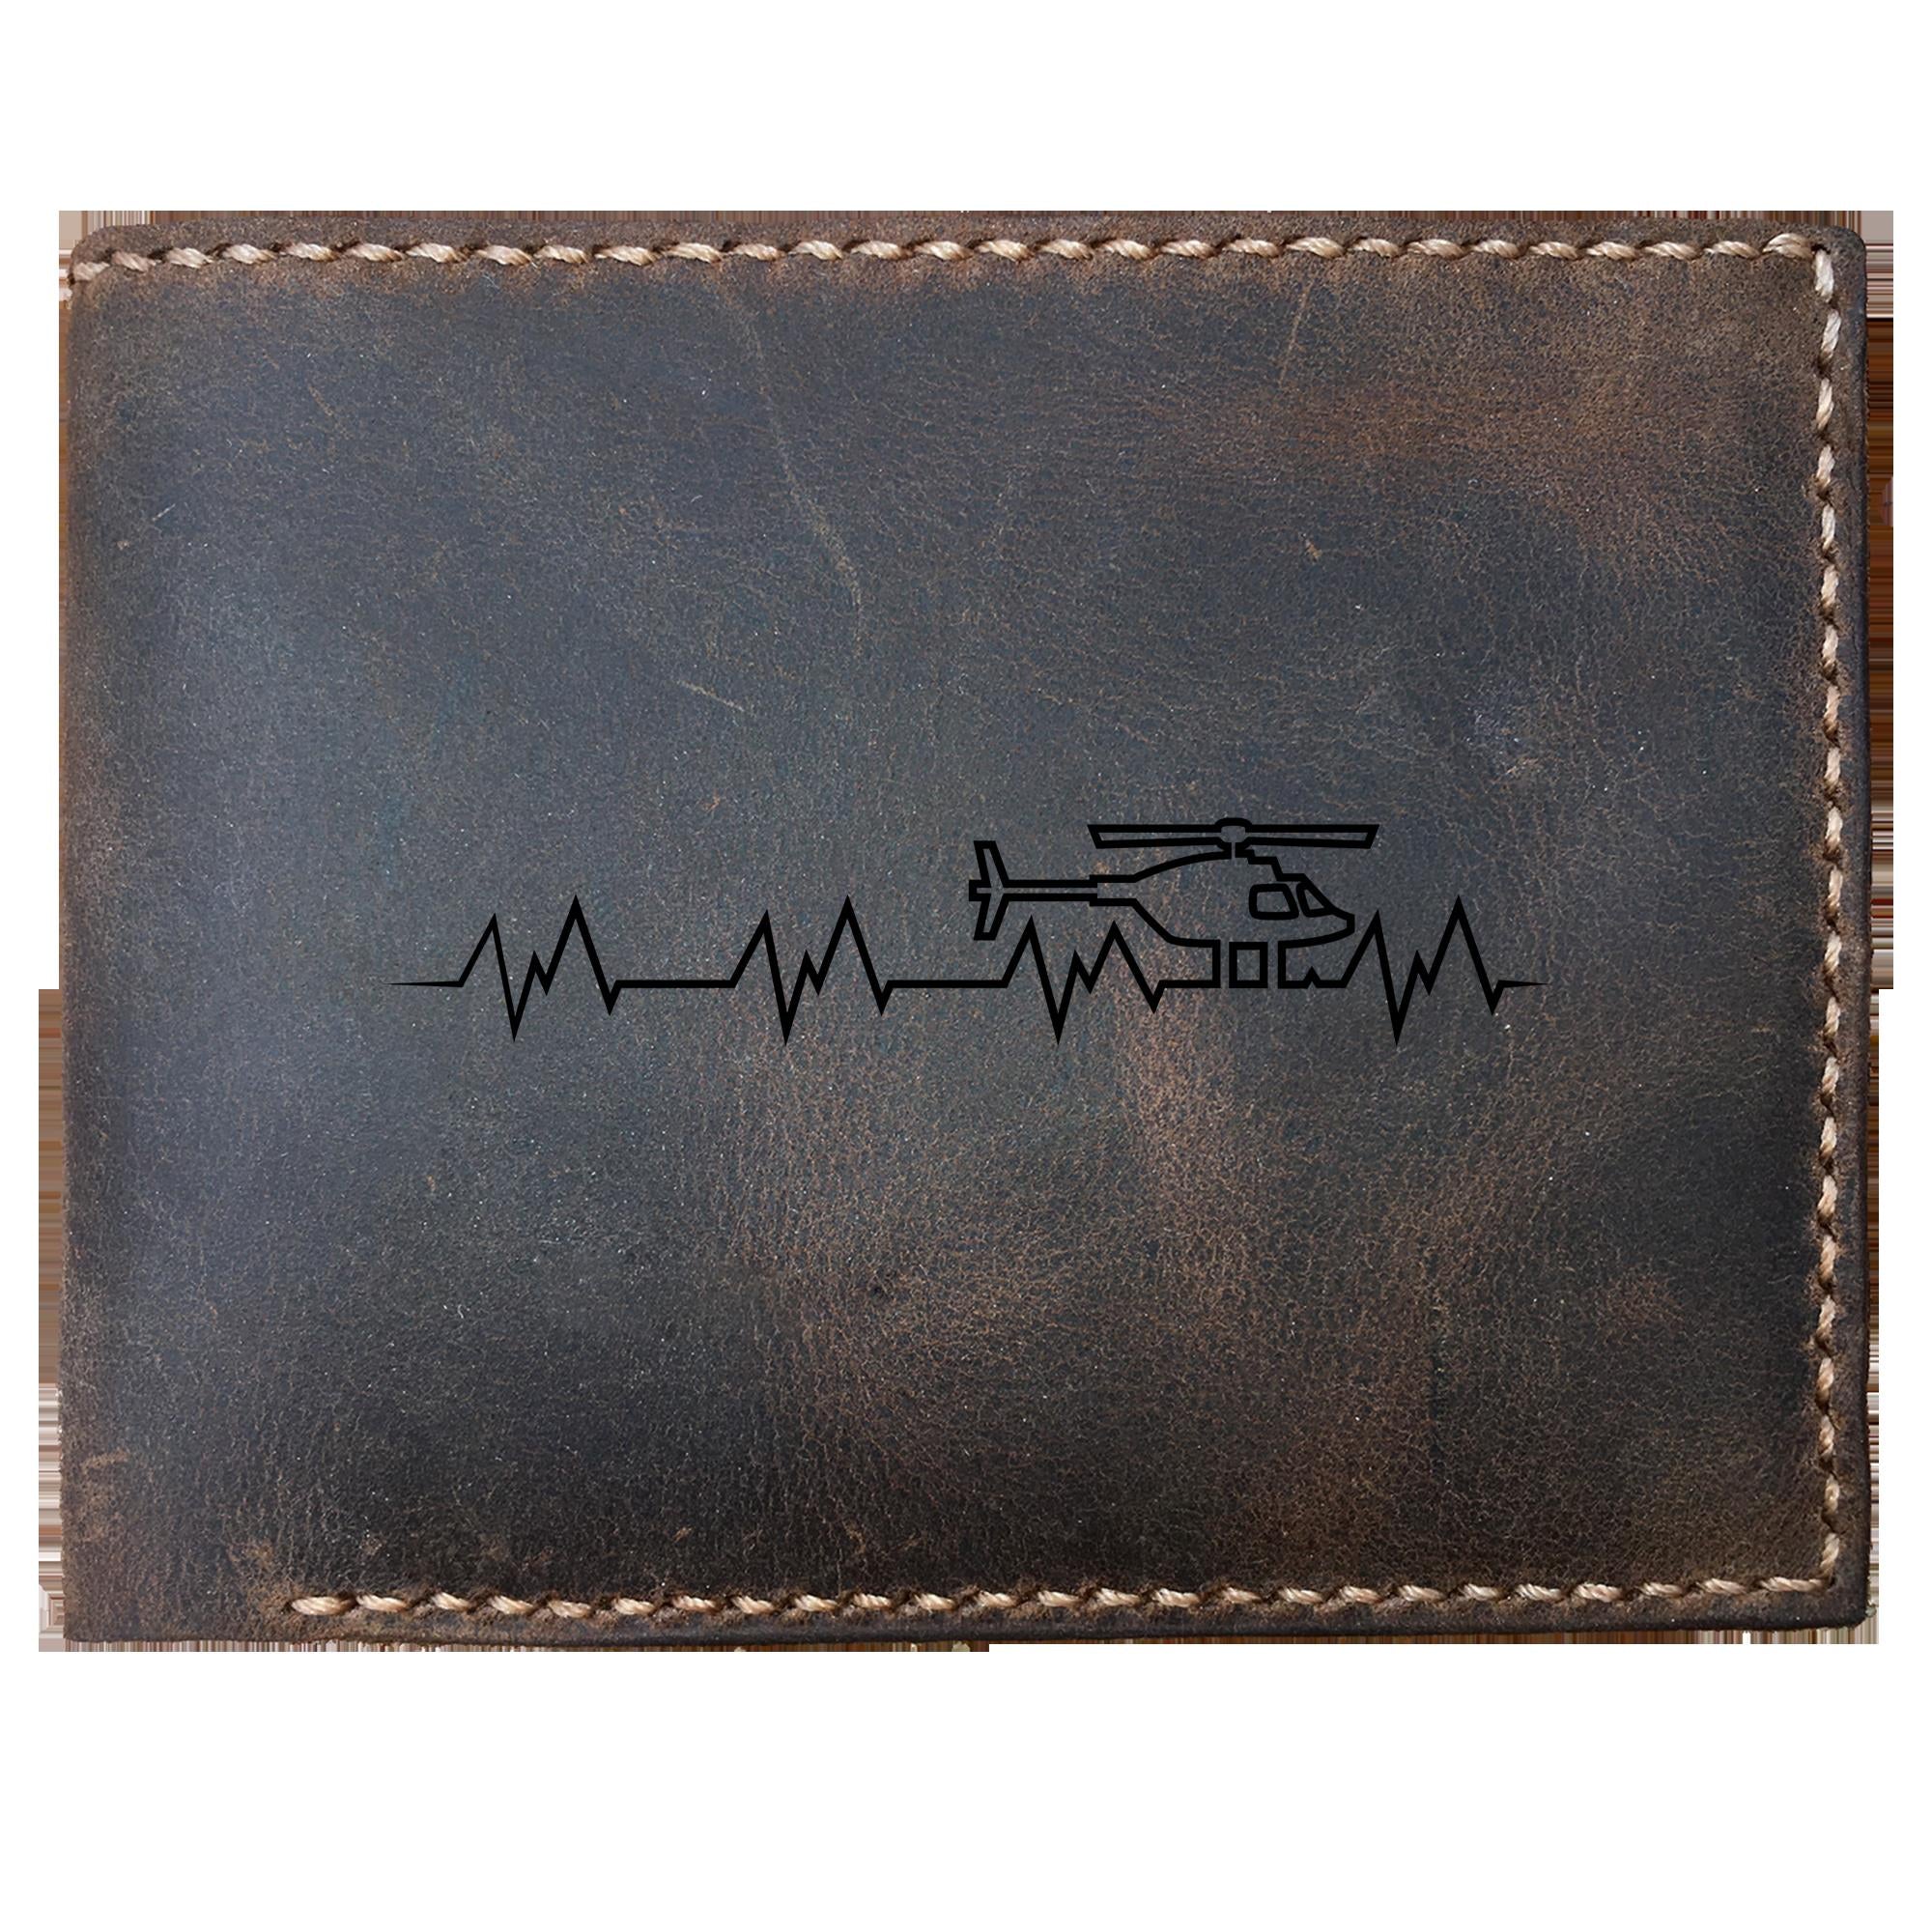 Skitongifts Funny Custom Laser Engraved Bifold Leather Wallet For Men, Helicopter Heartbeat, Helicopter Pilot